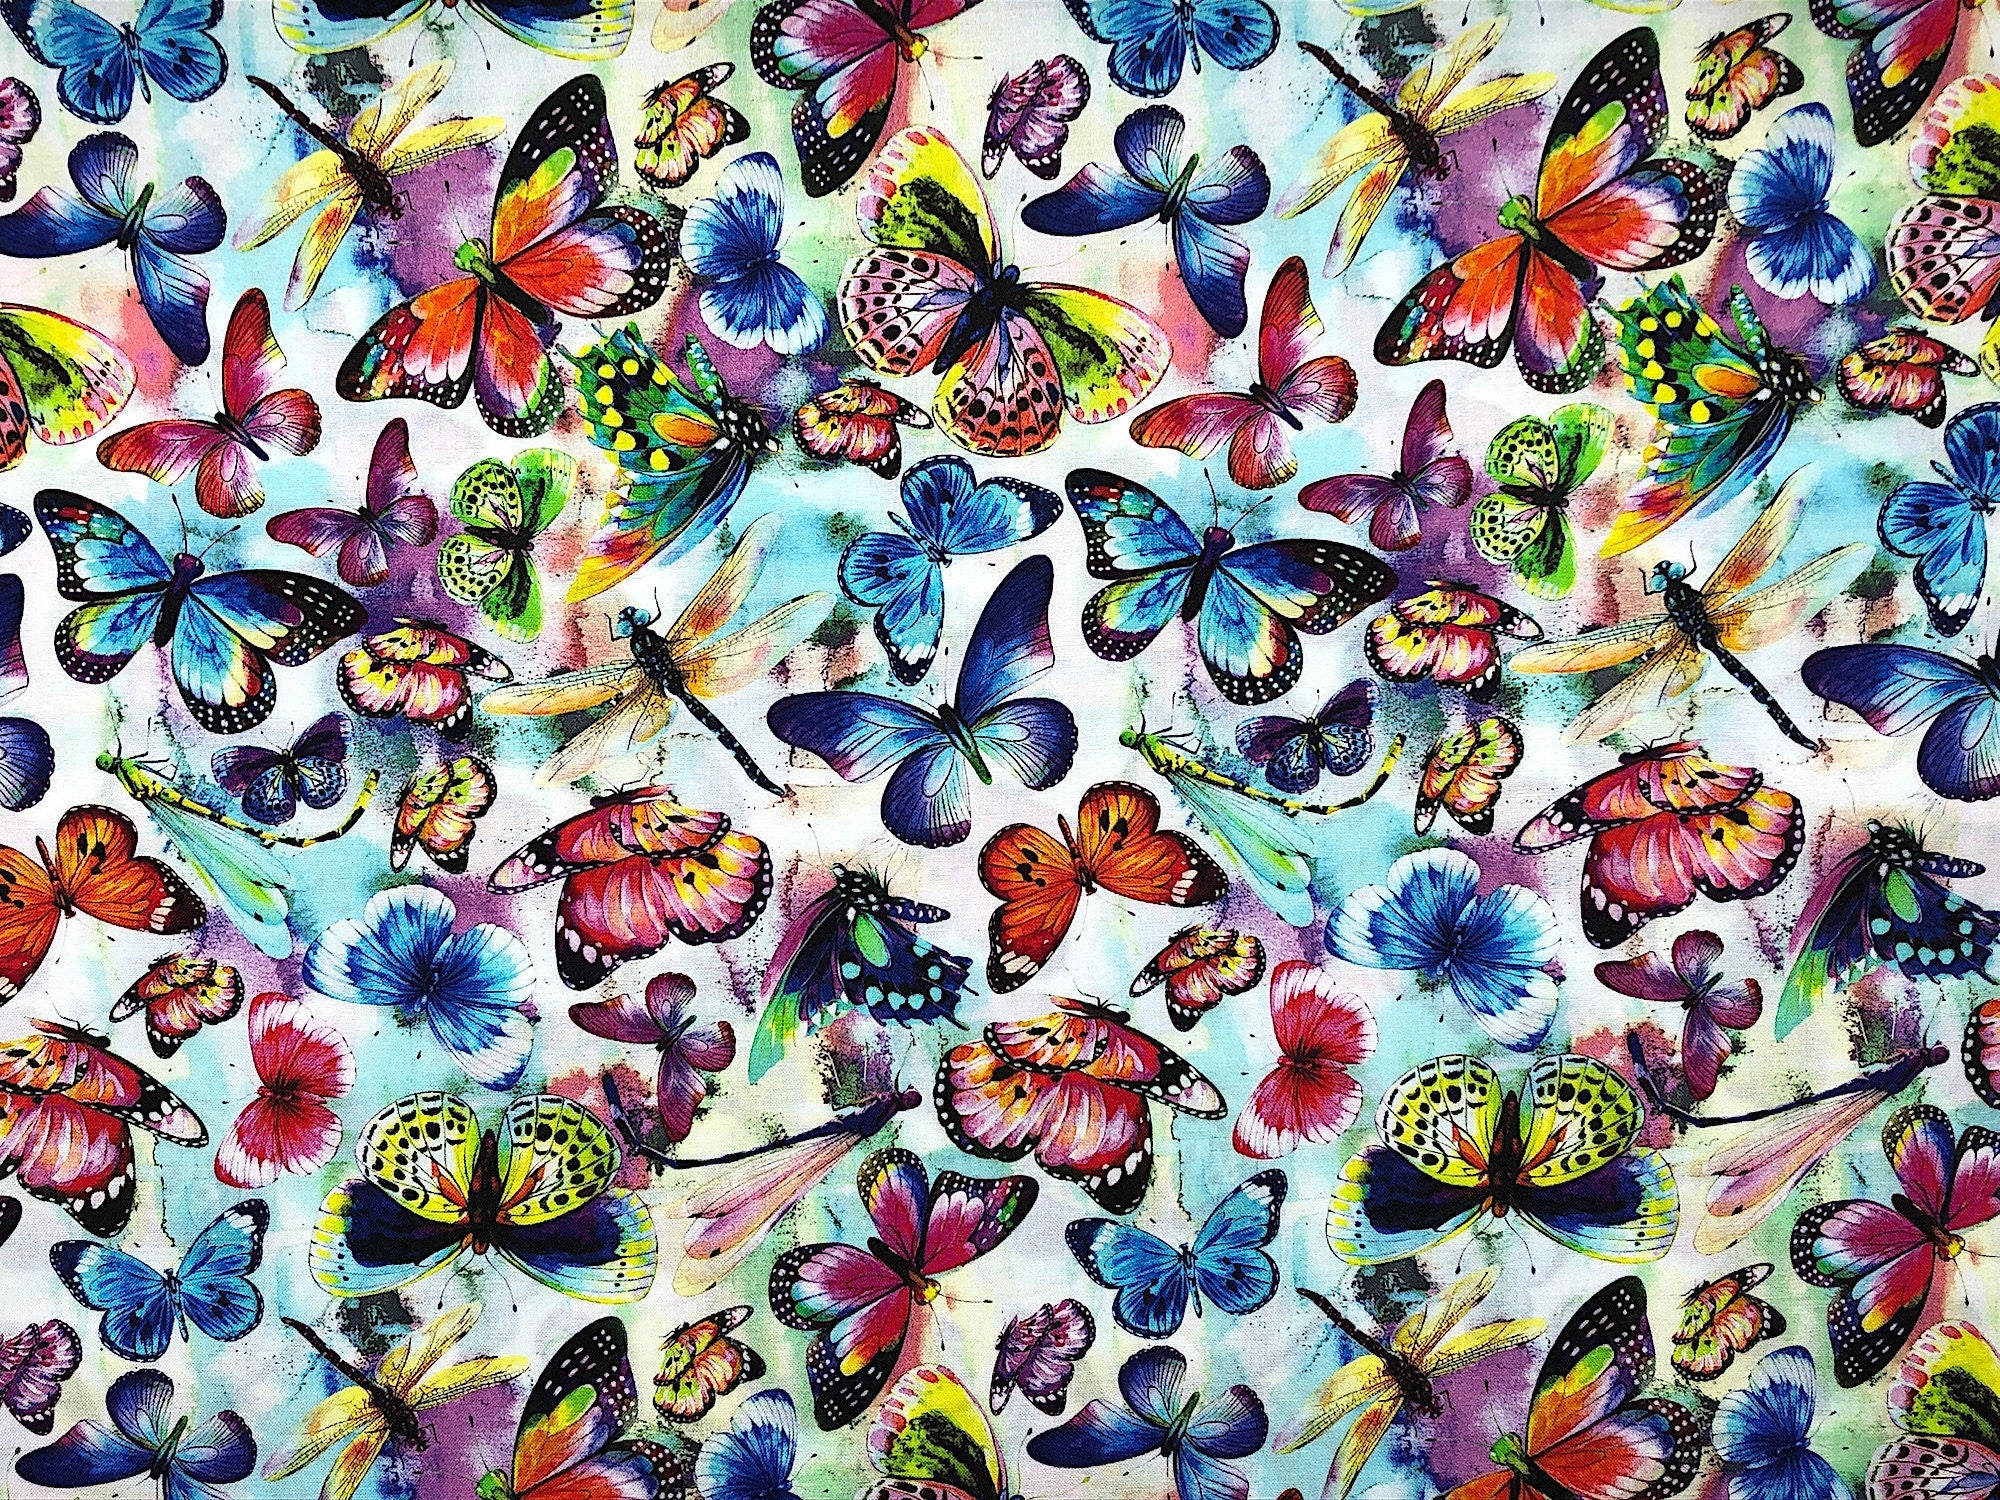 This fabric is called Butterflies multi. There are butterflies in every color of the rainbow and yellow, green and blue dragonflies.